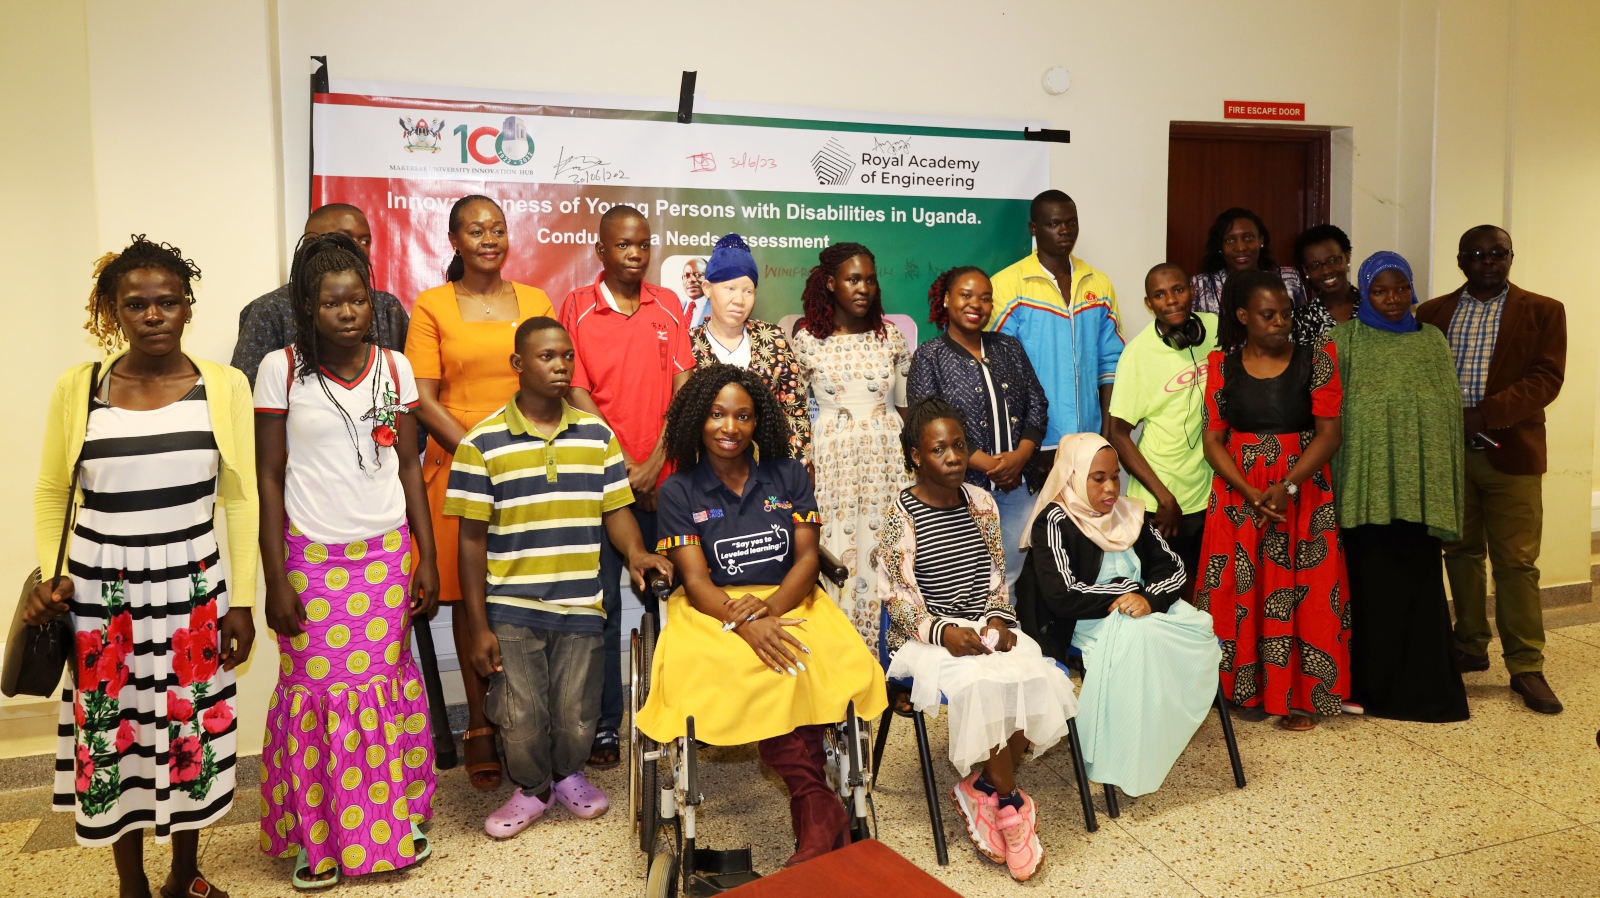 The Dean of Students-Mrs. Winifred Kabumbuli (Rear 2nd Left) with officials and some of the Persons With Disabilities at the launch on 30th June 2023. Makerere Innovation Hub, Yusuf Lule Central Teaching Facility, Makerere University, Kampala Uganda.